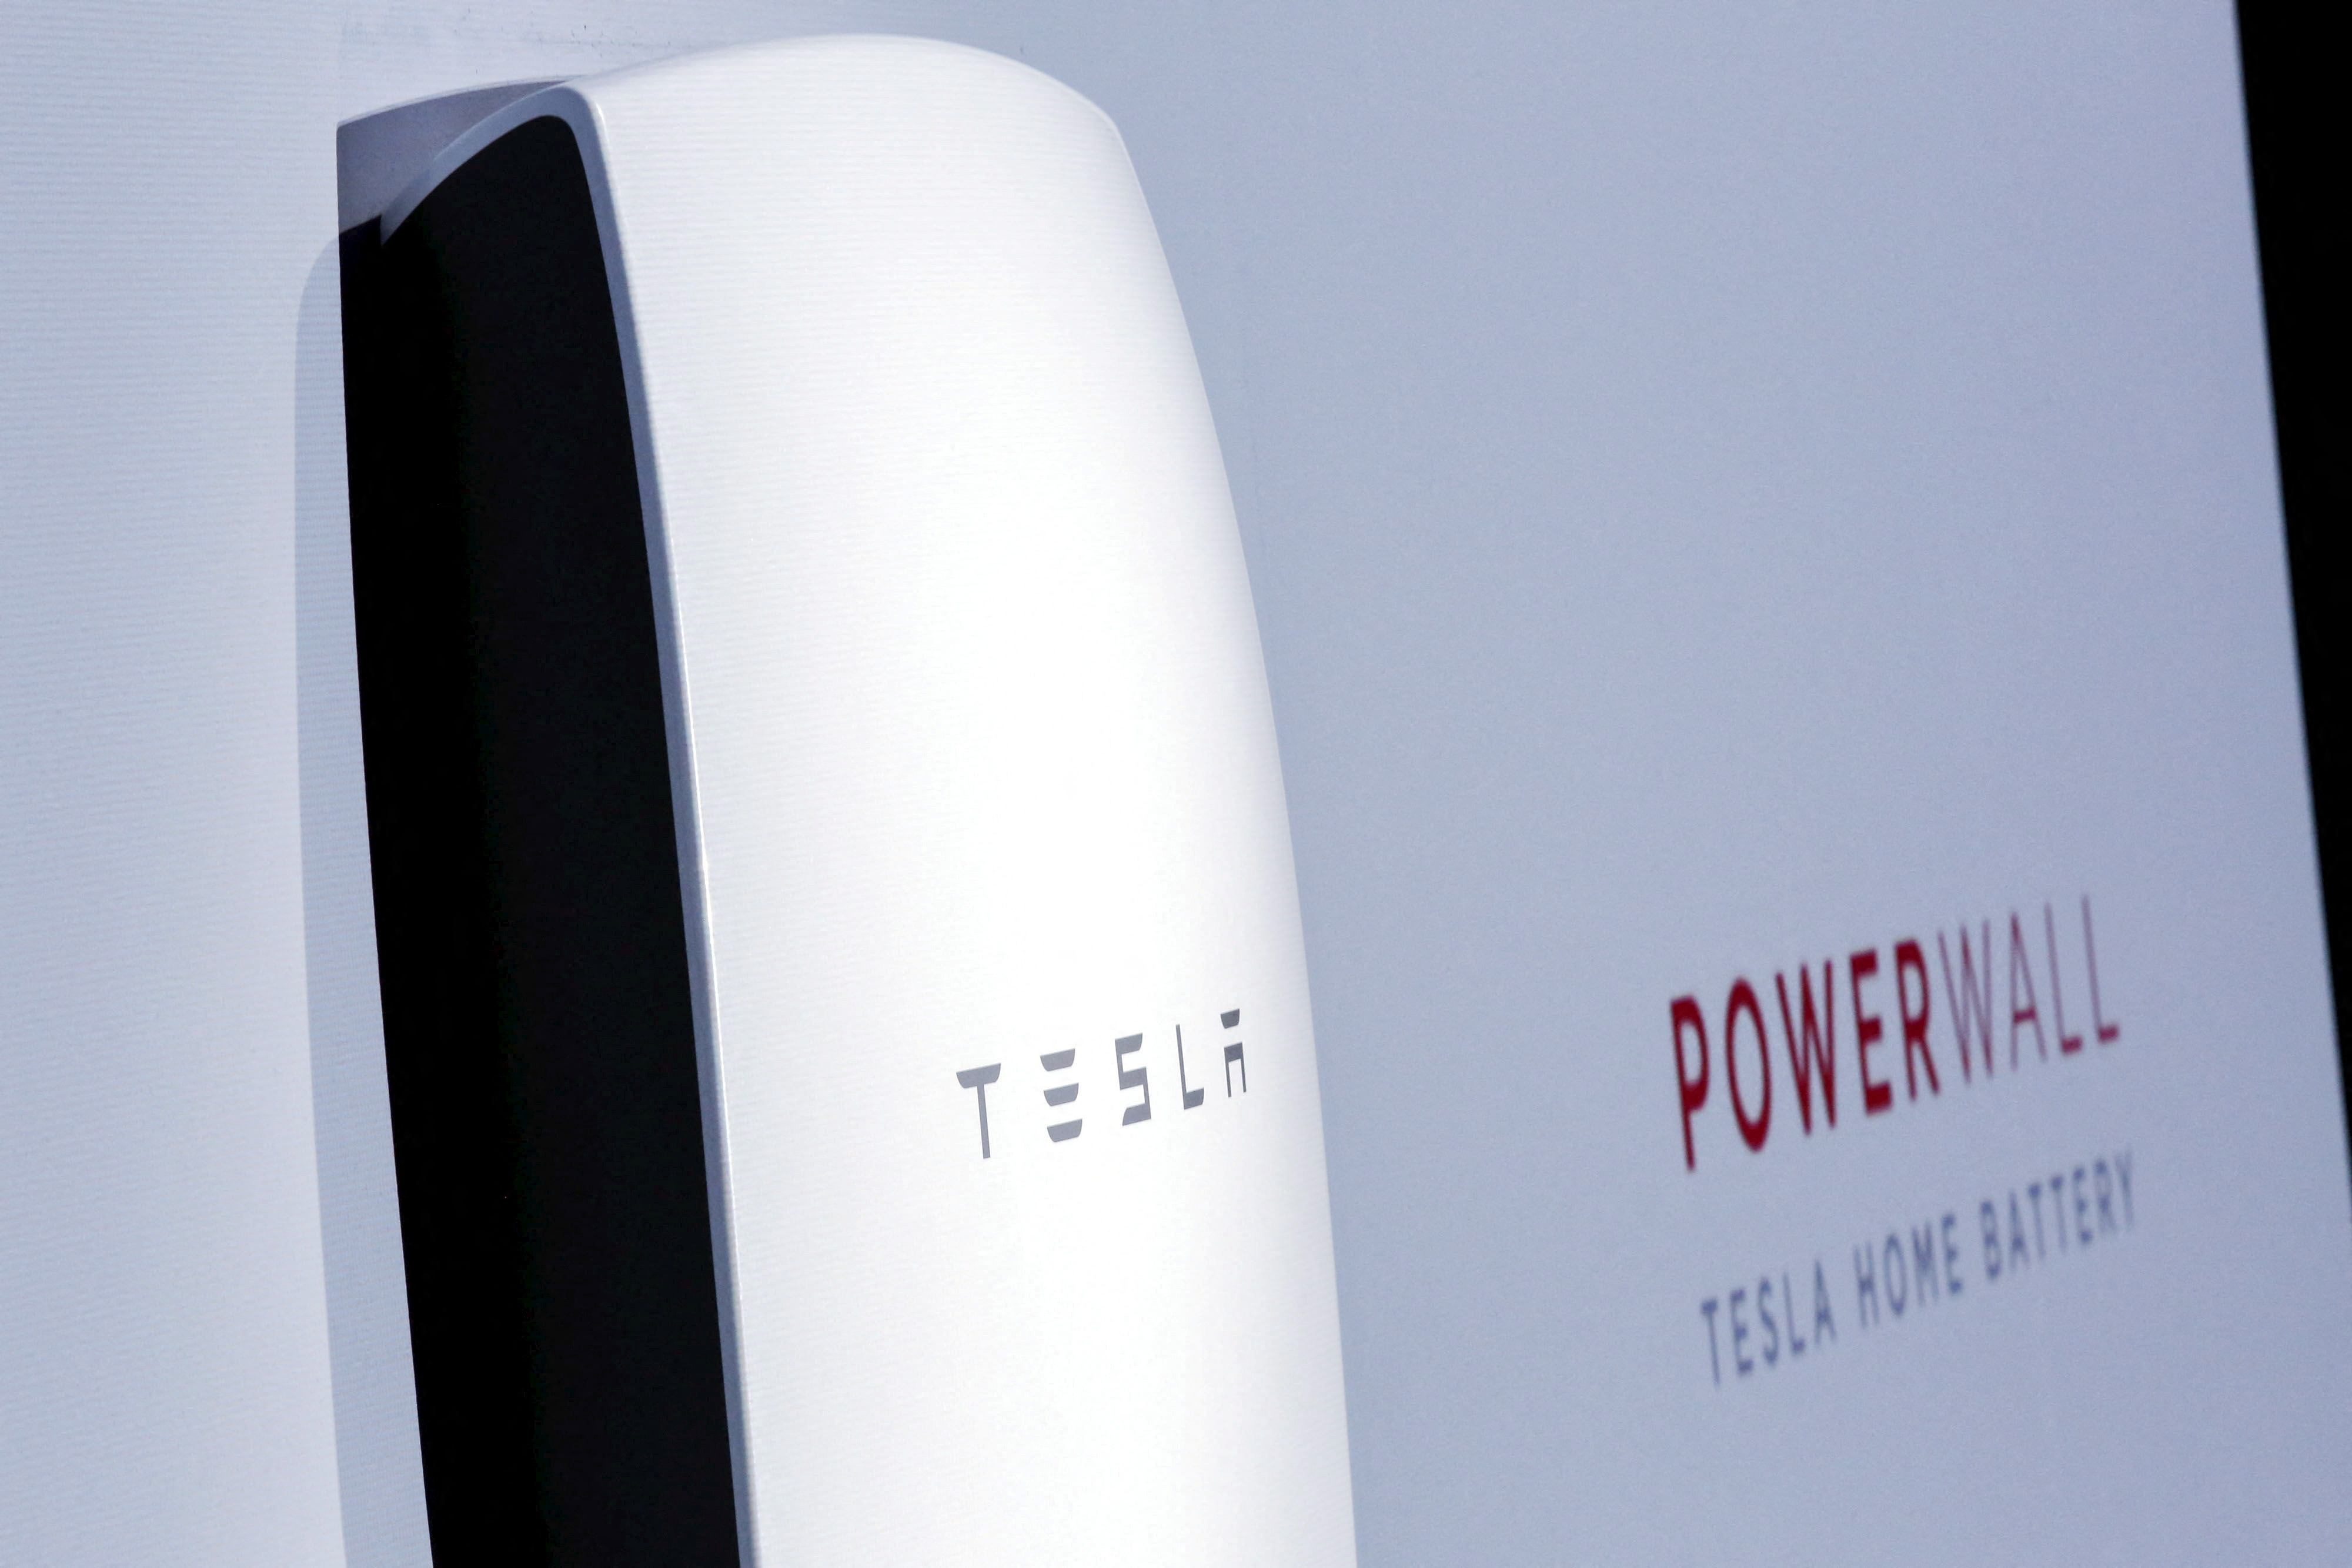 The Tesla Energy Powerwall Home Battery is unveiled by Tesla Motors CEO Elon Musk during an event in Hawthorne, California